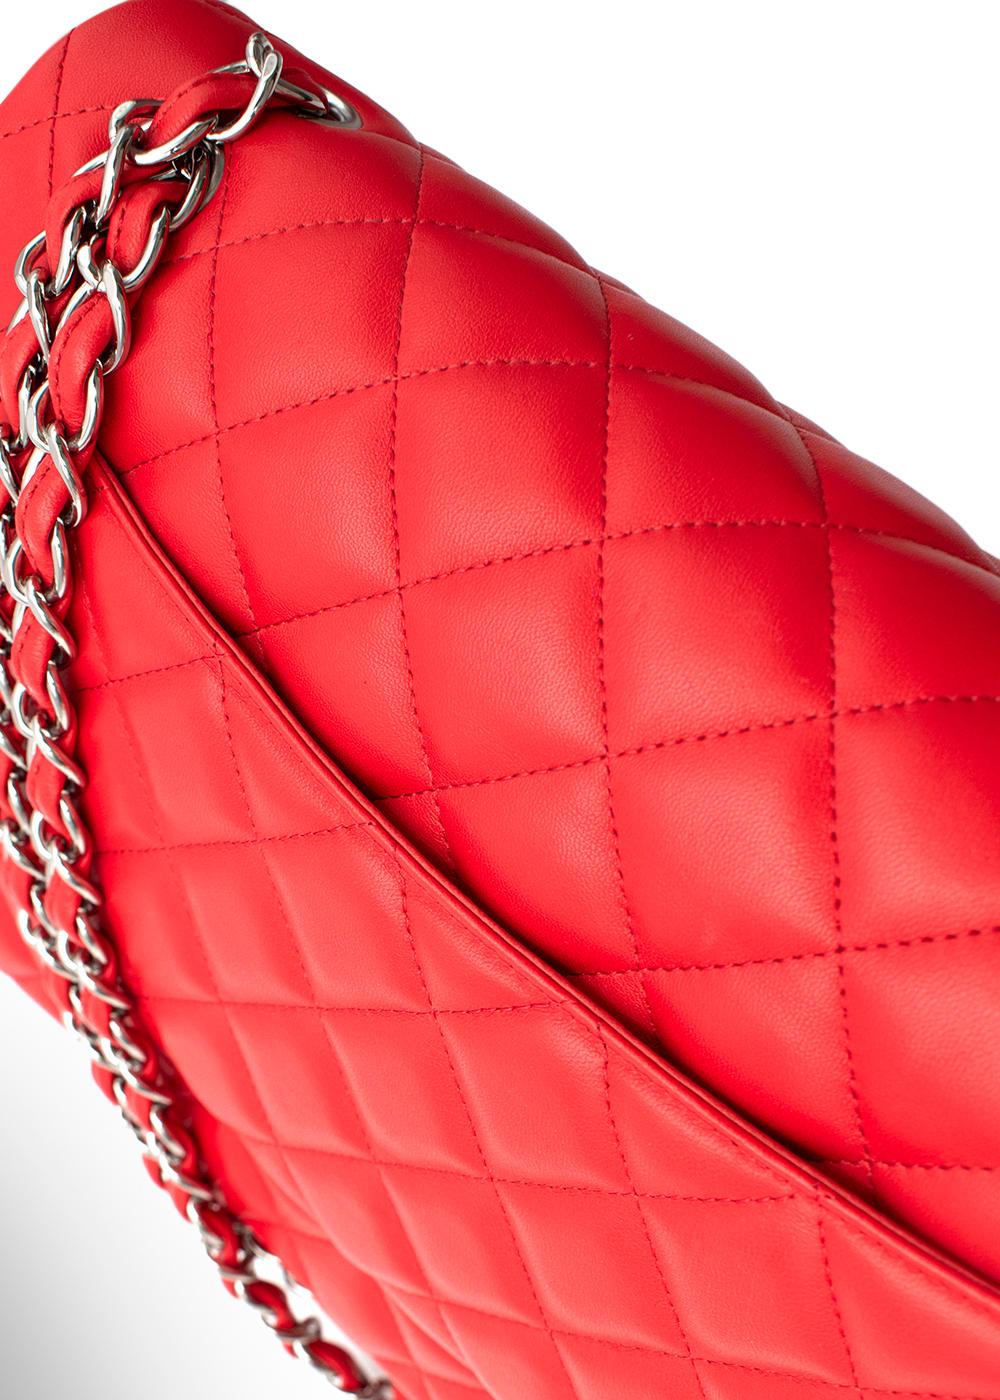 Chanel Red Quilted Leather Jumbo Double Flap Bag  For Sale 5